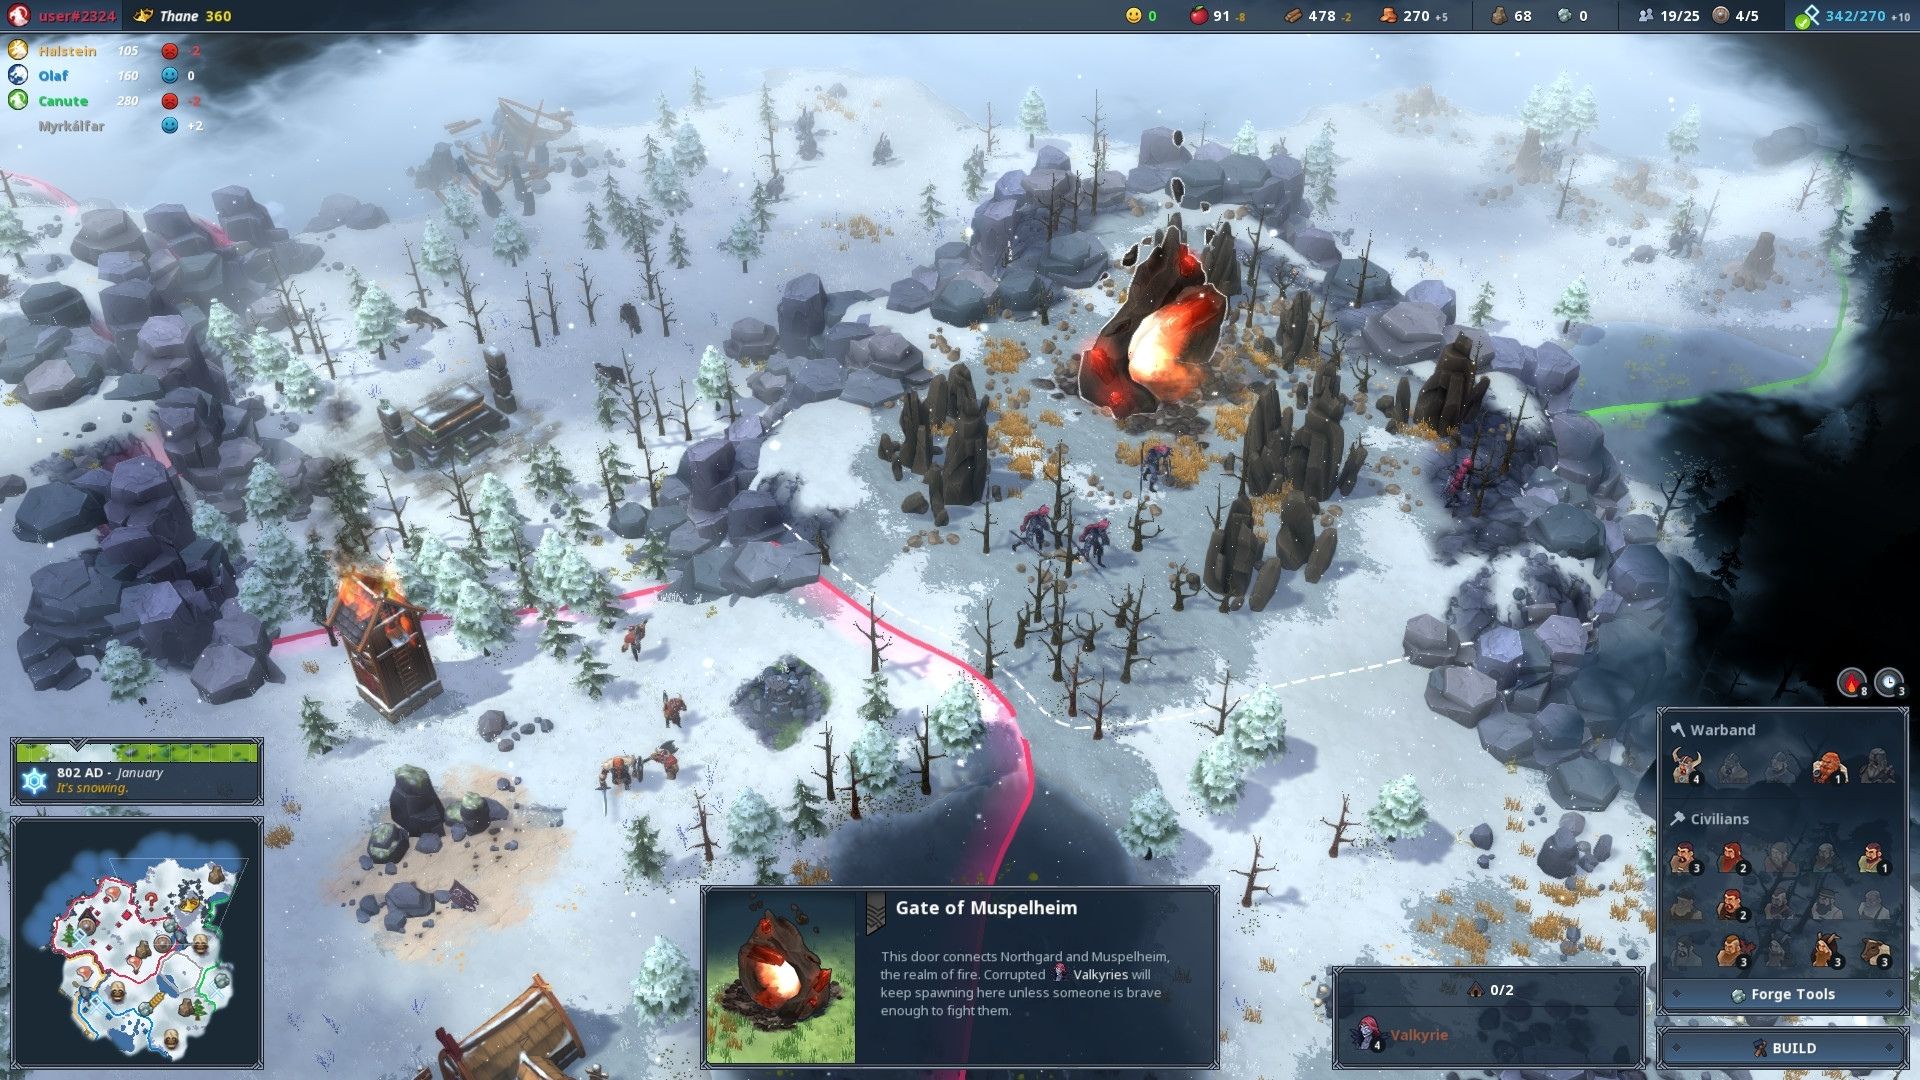 A screenshot from Northward, showing a snowy tundra with trees and a fire in the distance.